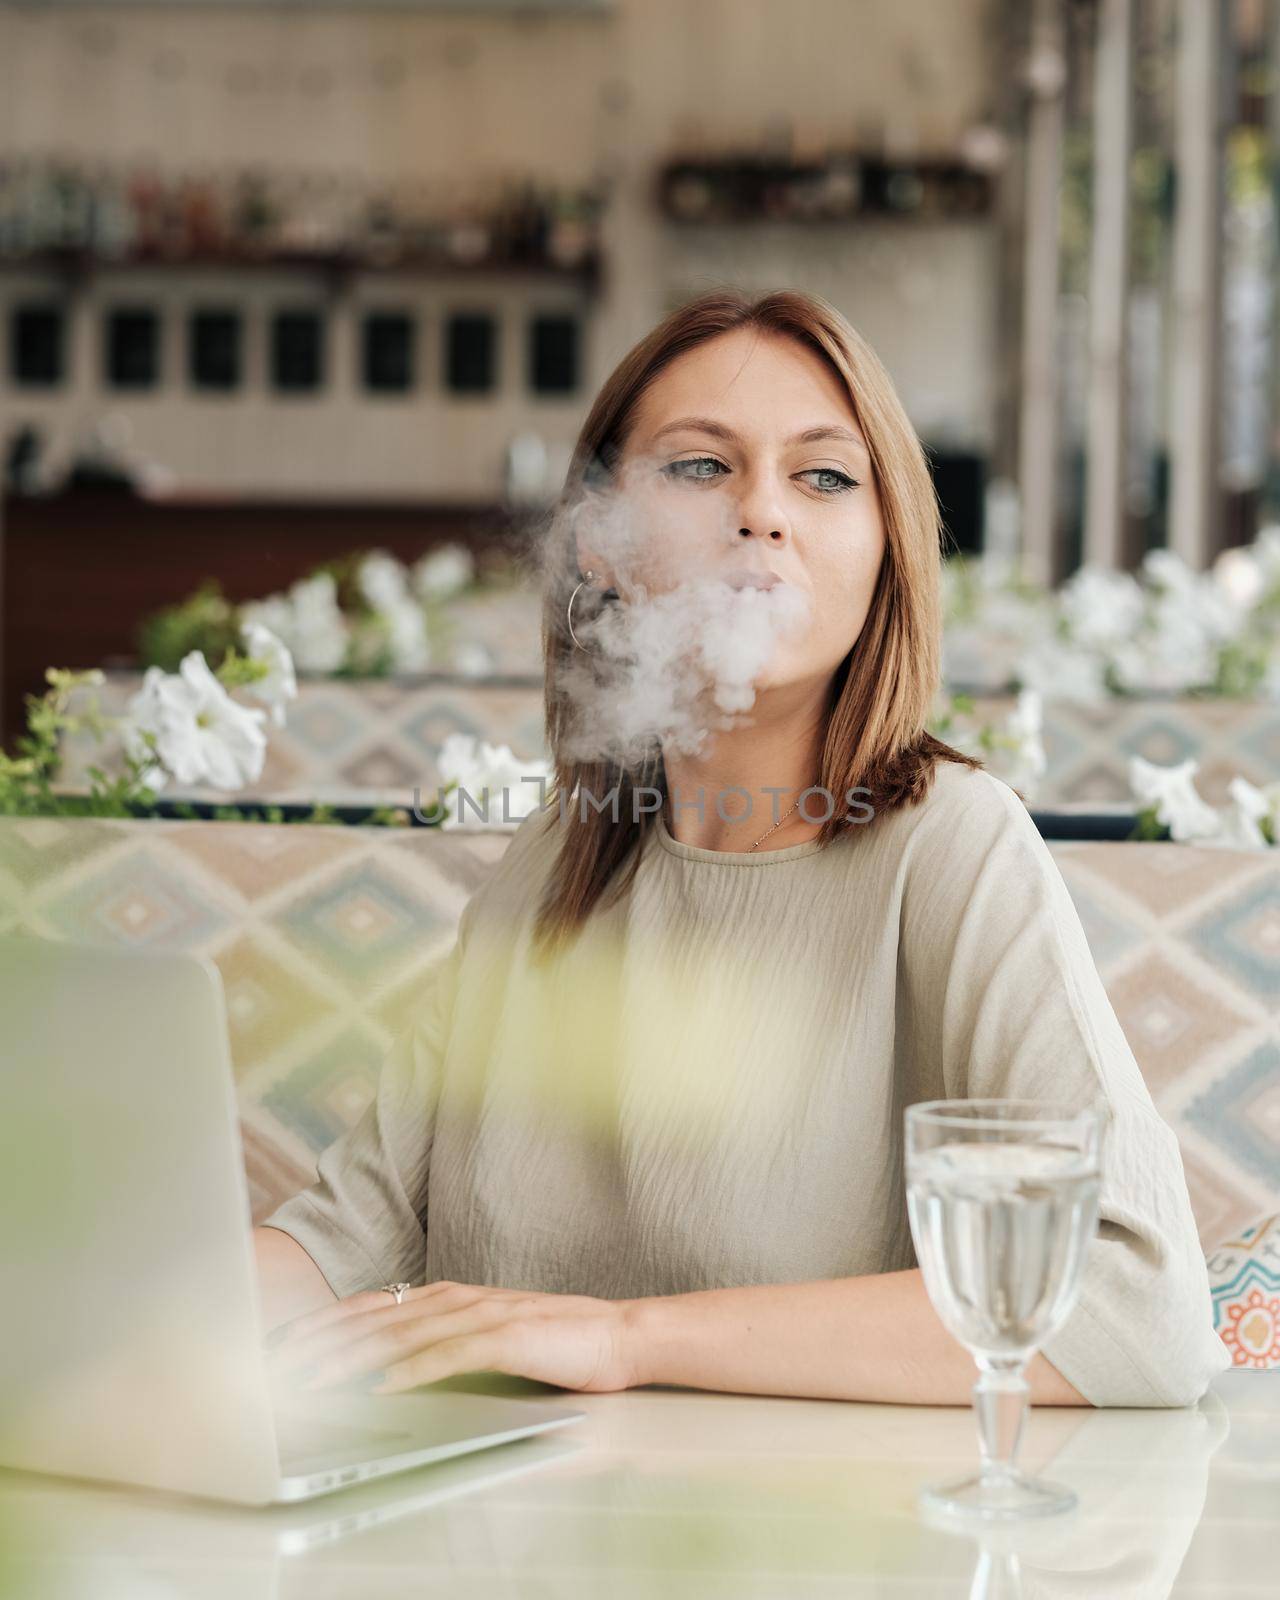 Young Woman Smoking Electronic Cigarette in the Restaurant While Working on Laptop by Romvy